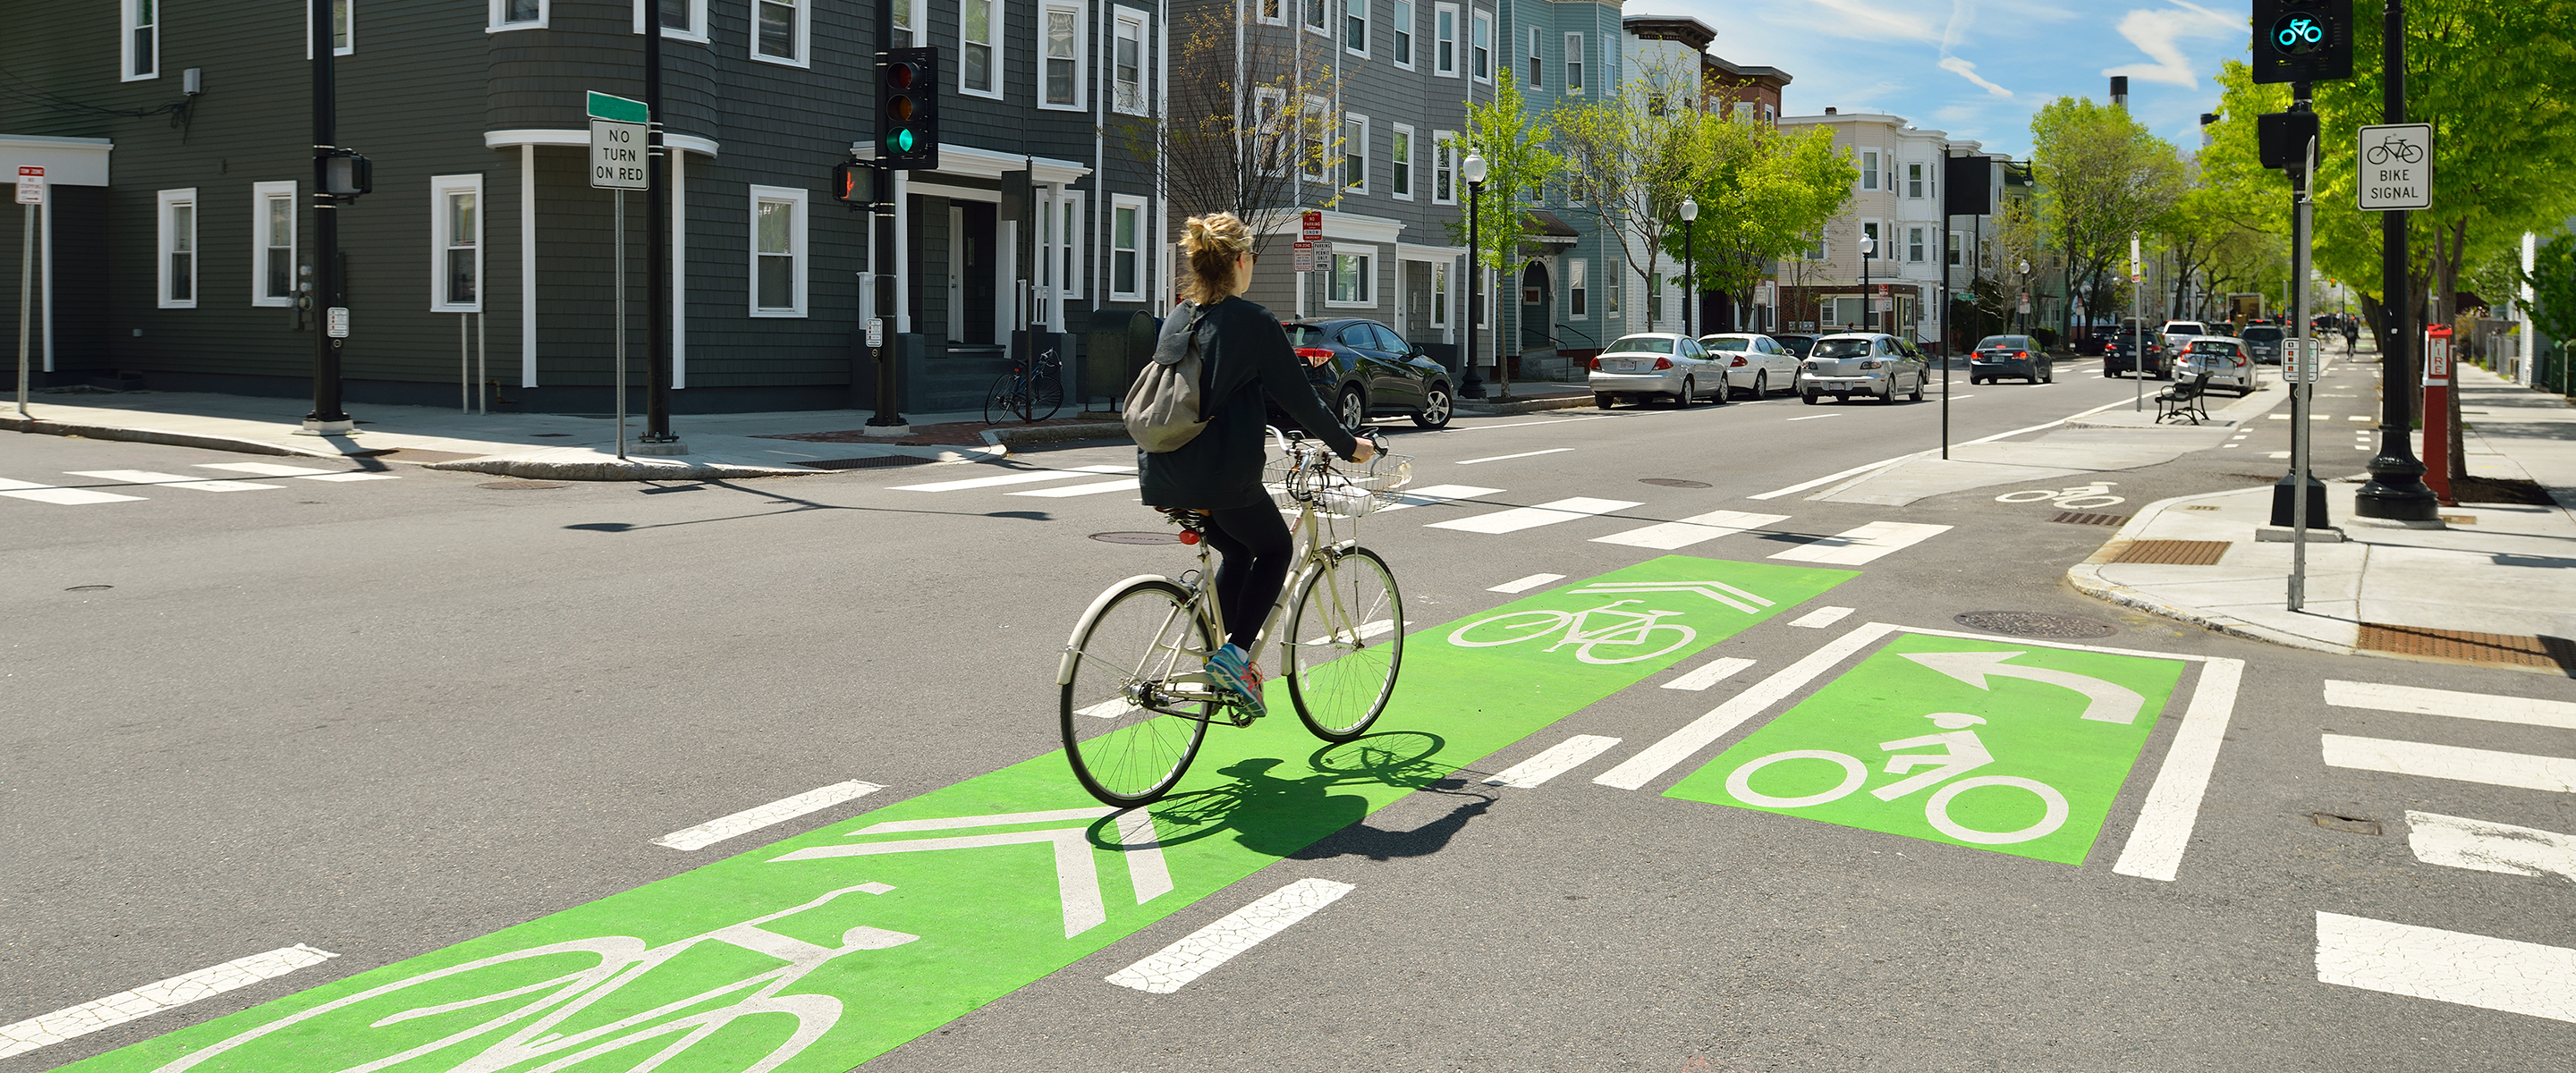 person riding a bike in a bike lane with bright green paint